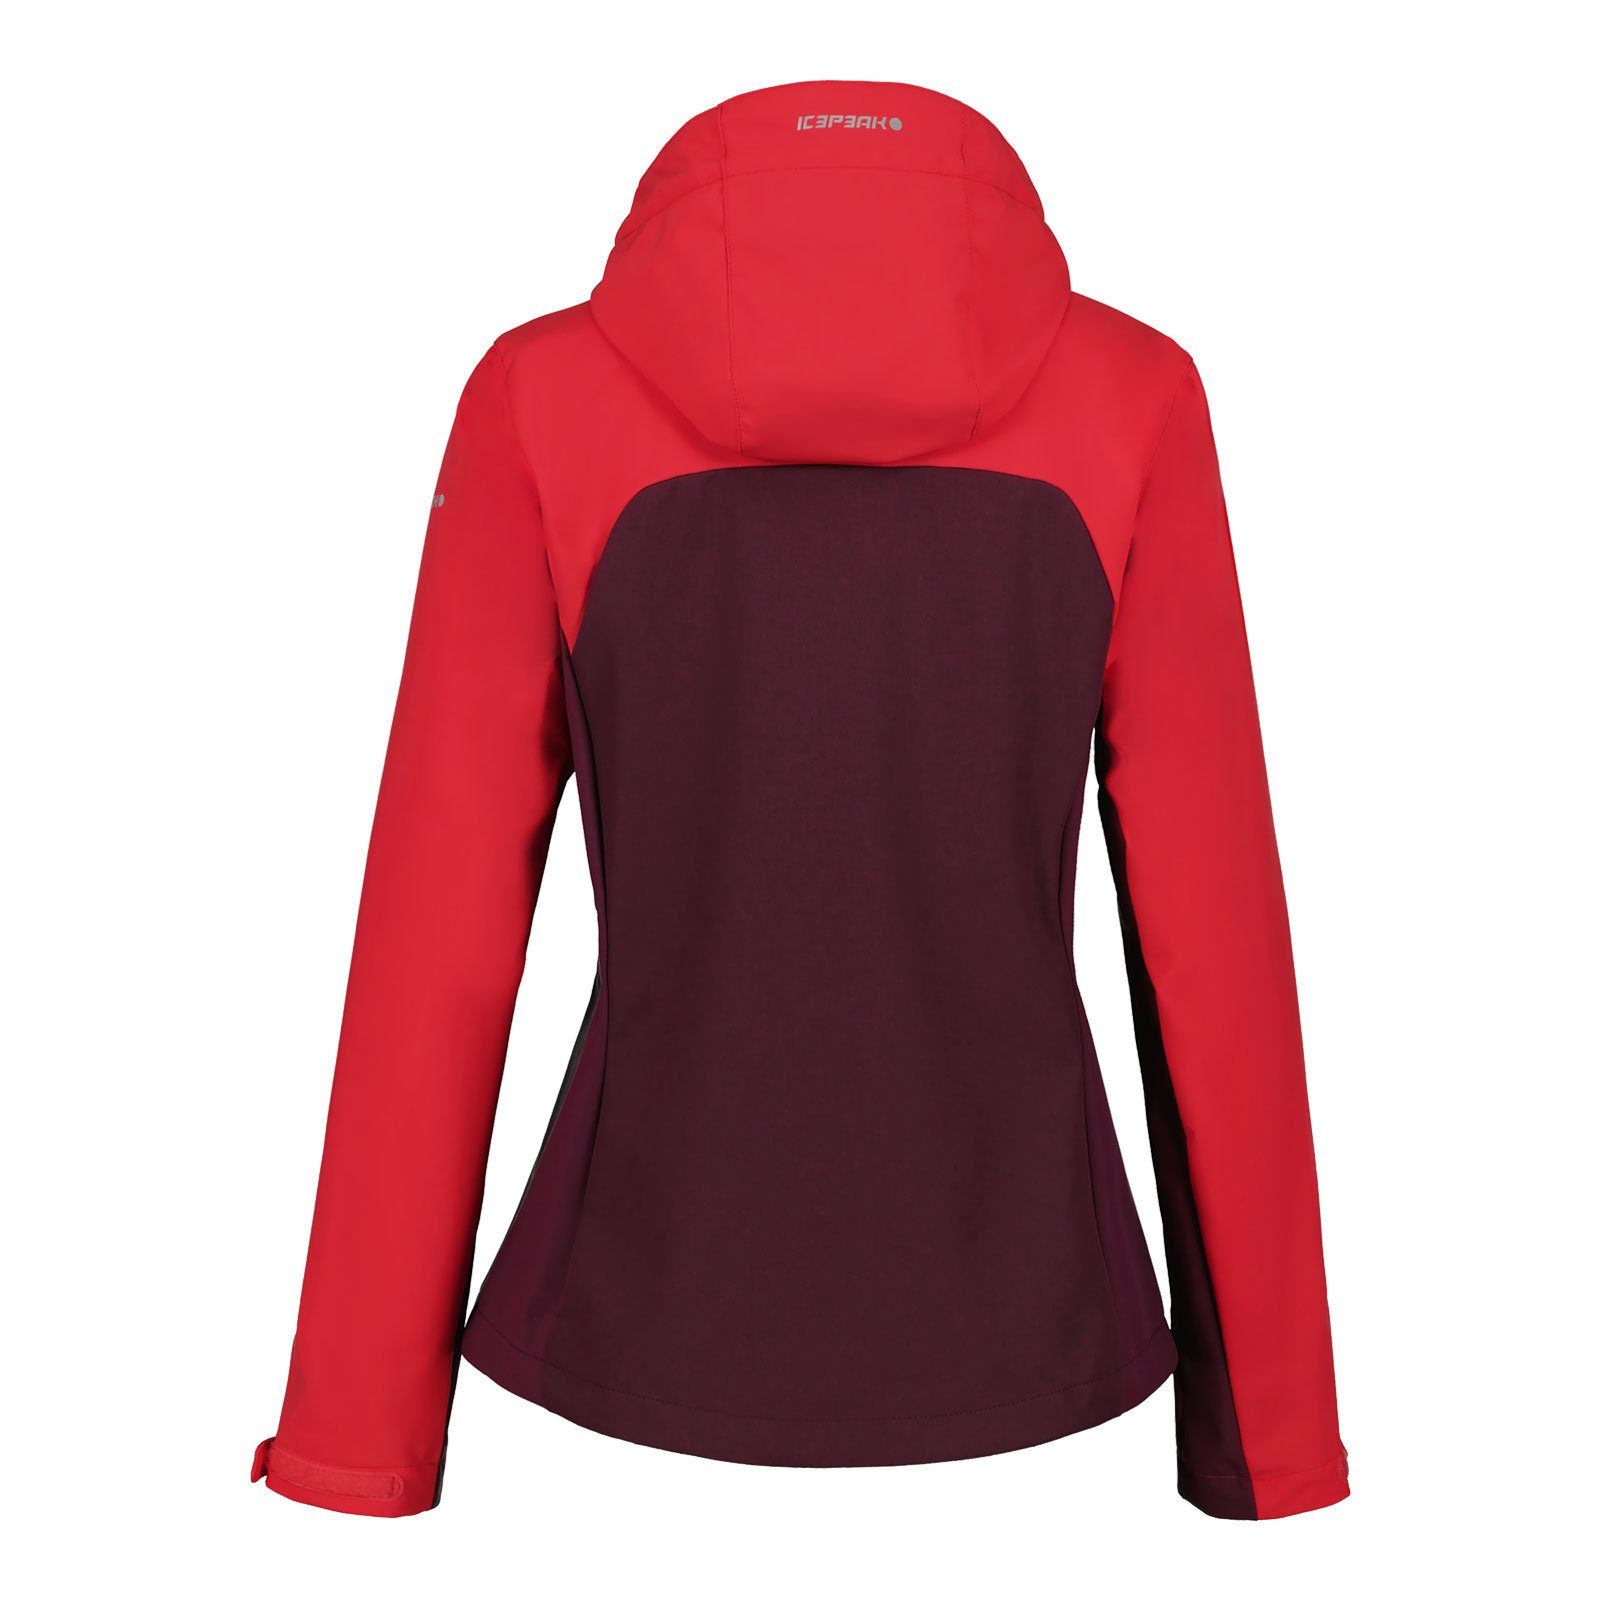 Icepeak Softshelljacke Broadus Active / coral - Wear 643 red Active mit A.W.S. System